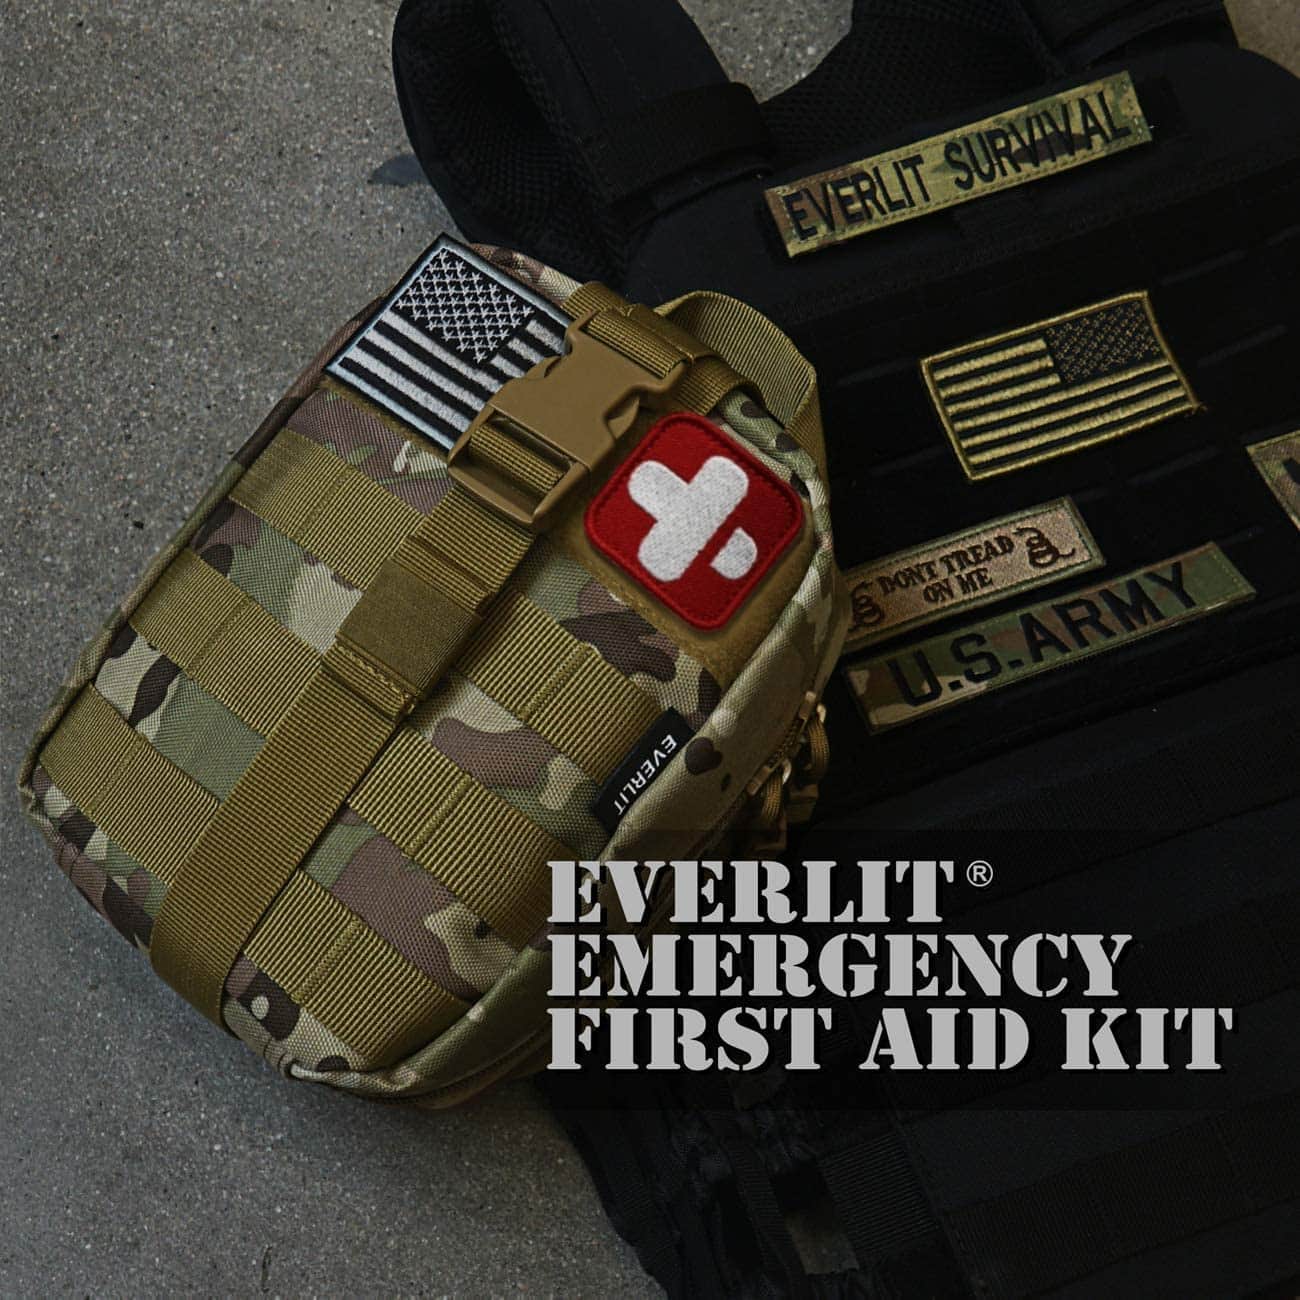 Black Survival First Aid Kit Contains Contains 250 Piece First Aid Kit - 5 